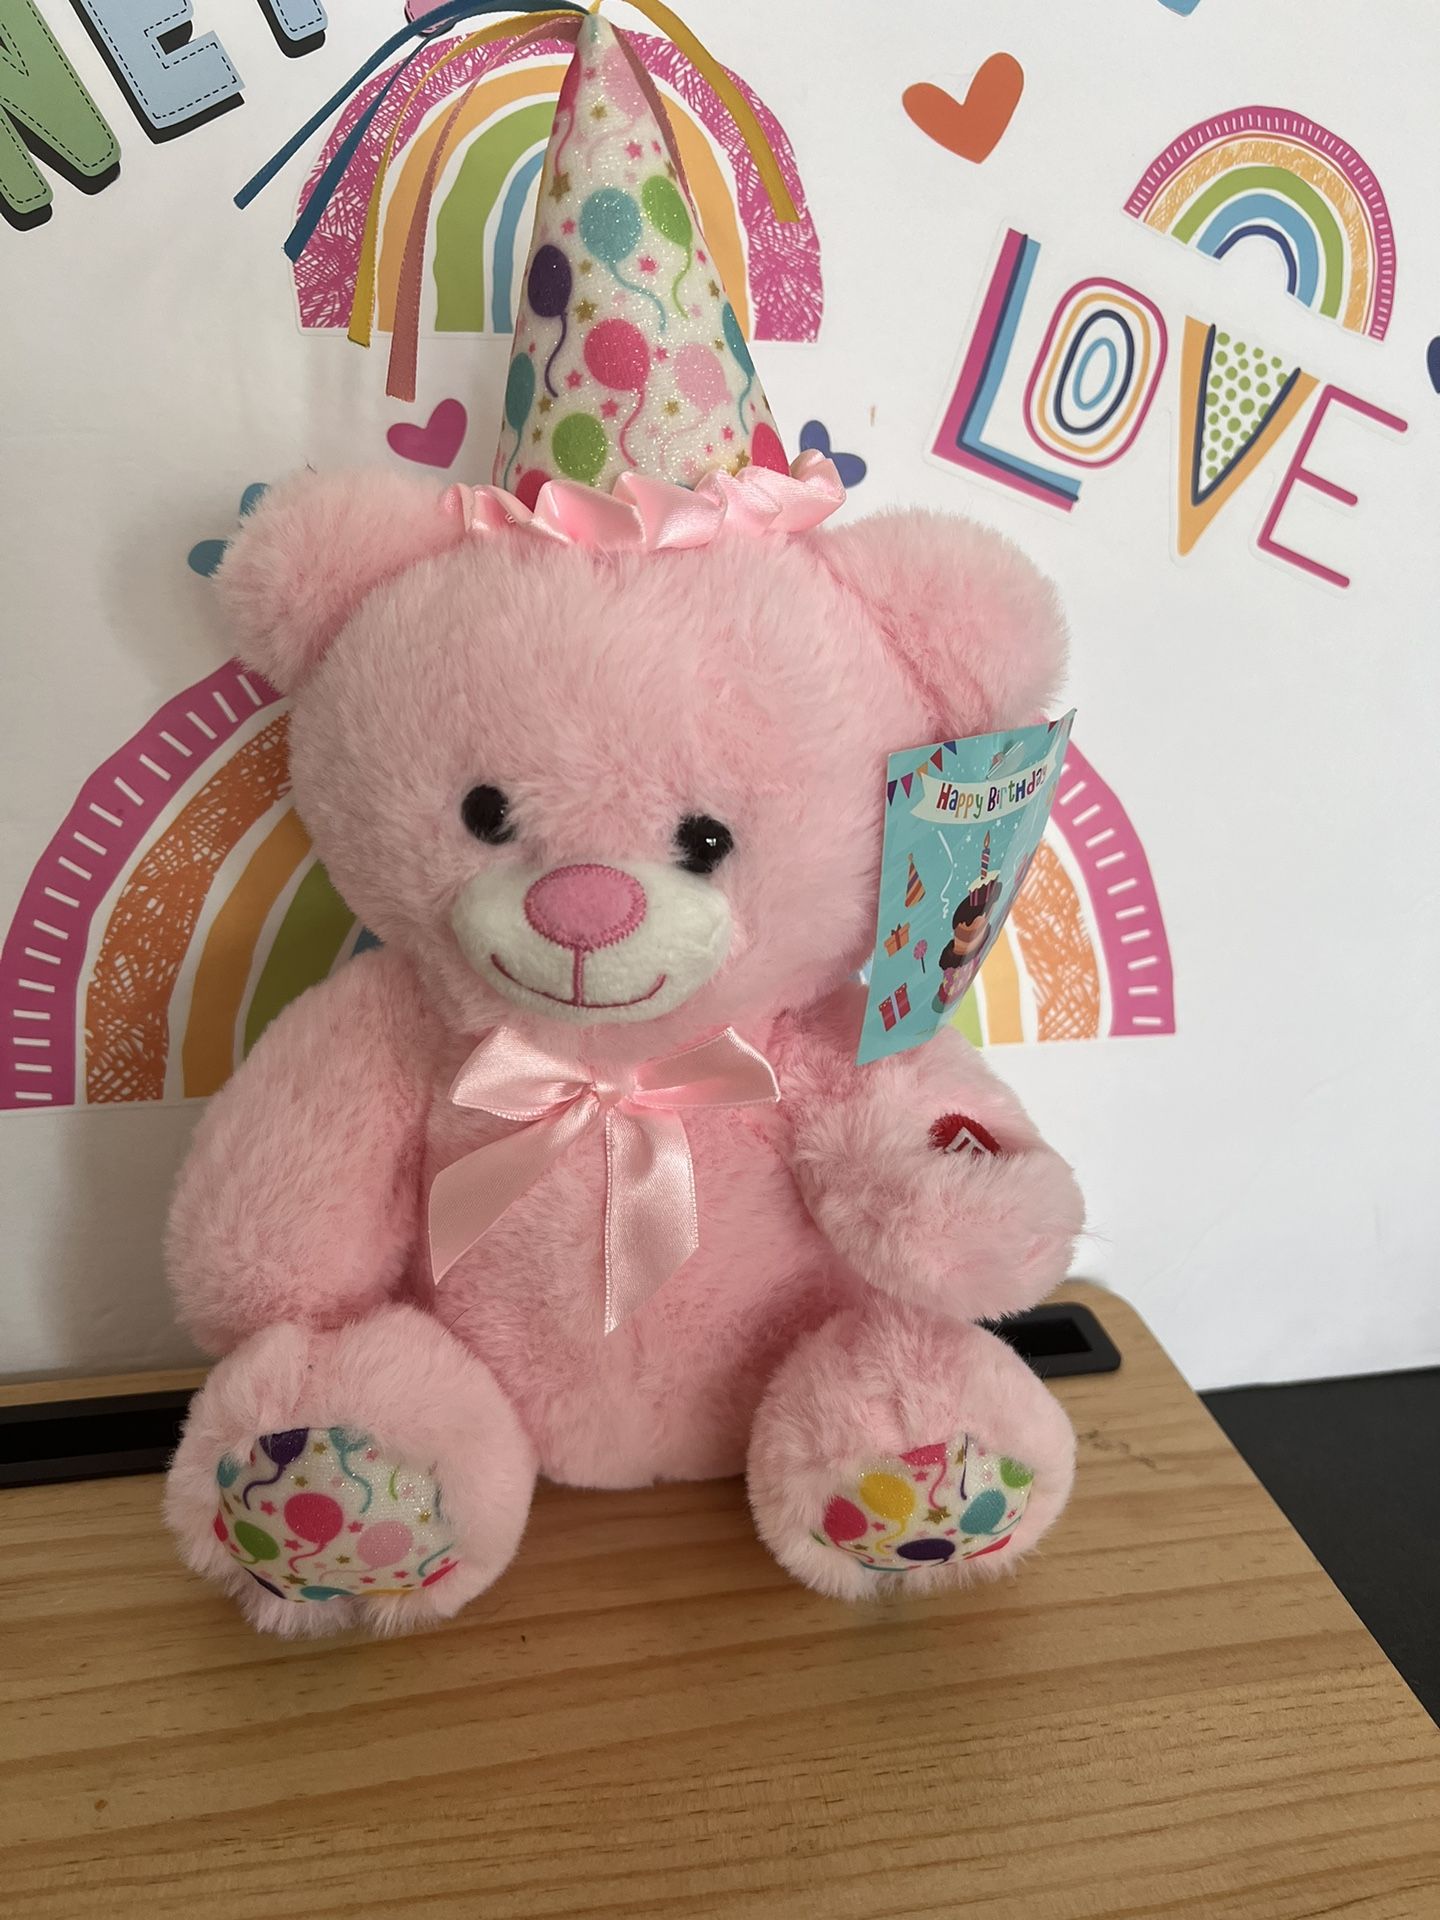 PINK BIRTHDAY SINGING PLUSH! 12 INCH WITH TAGS - Lights Up And Plays HAPPY BIRTHDAY